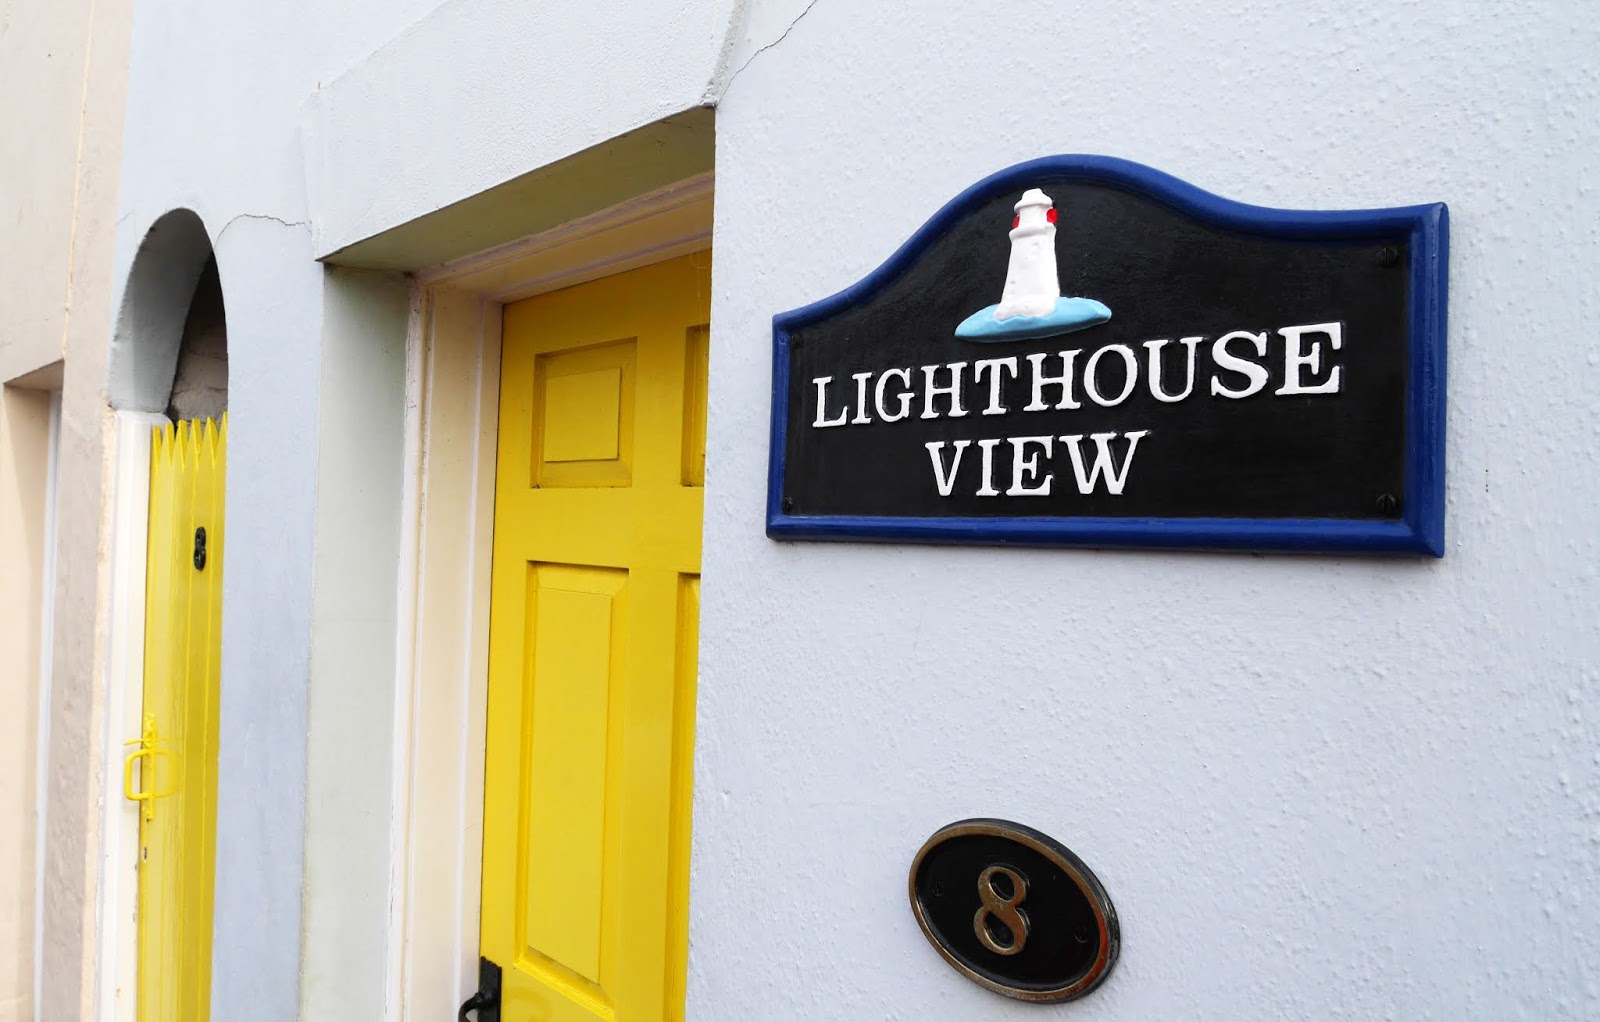 Lighthouse View house in Southwold, Suffolk